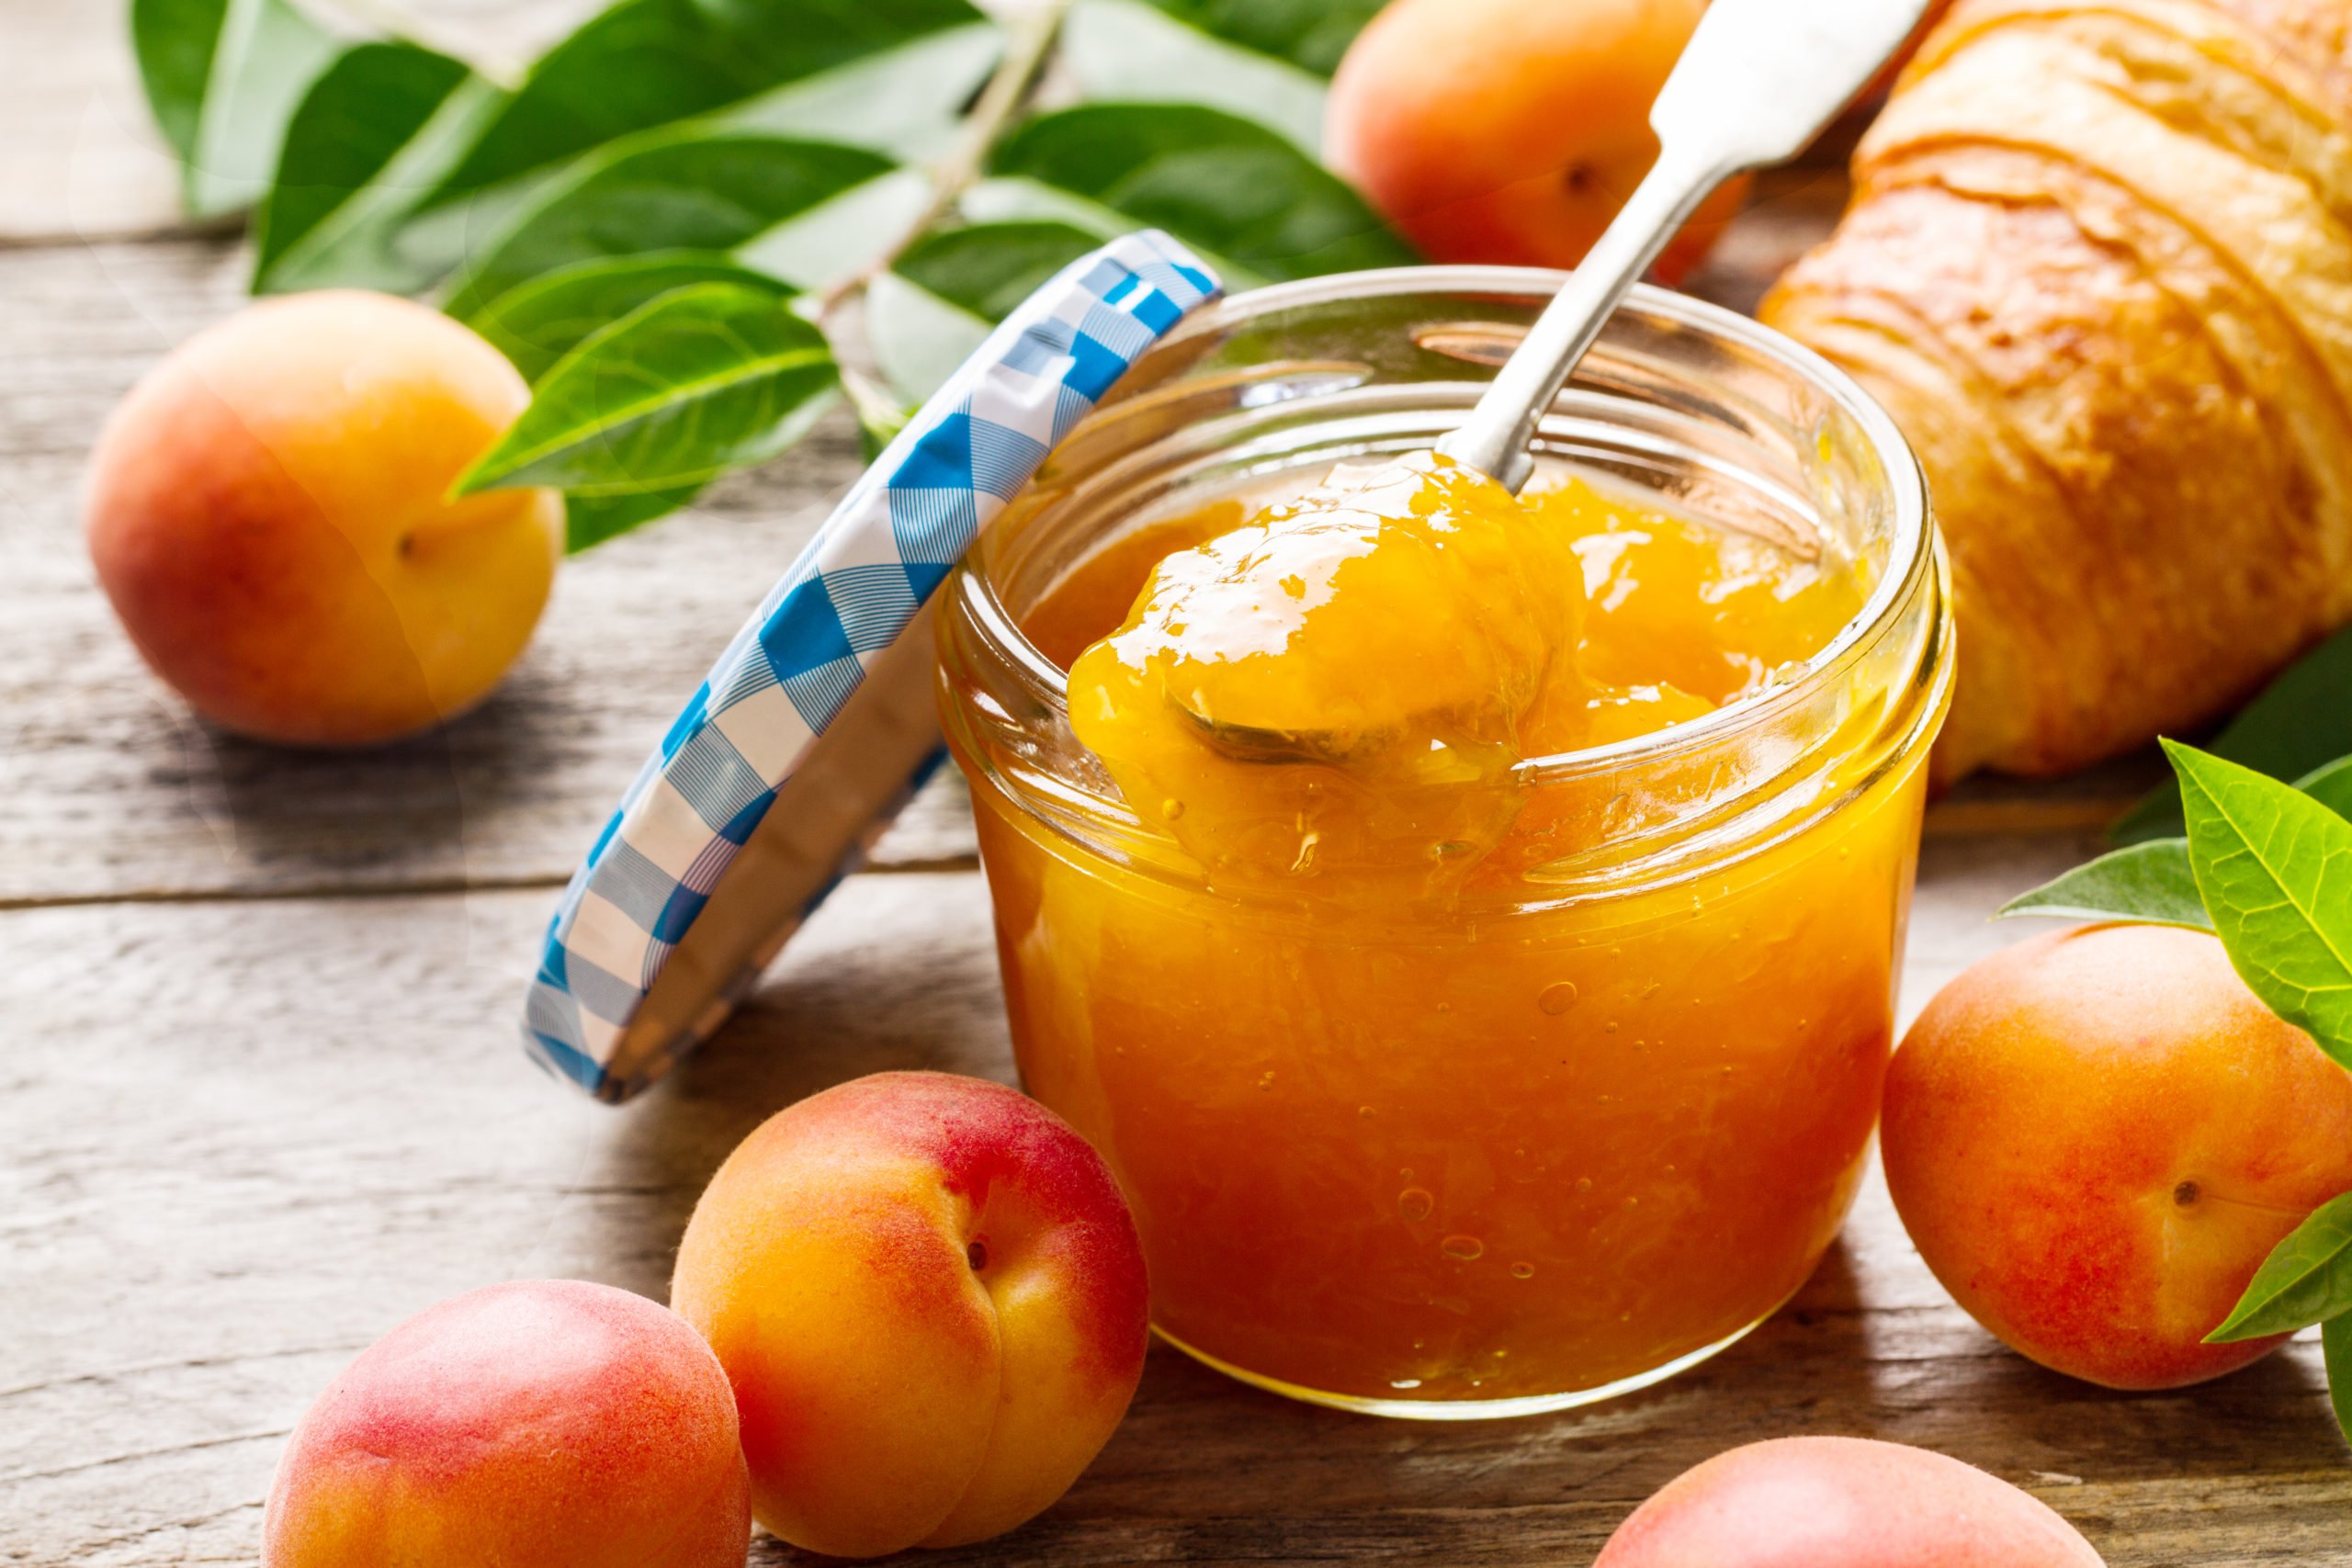 Tasty fruit orange apricot jam in glass jar with fruits on wooden table. Closeup.